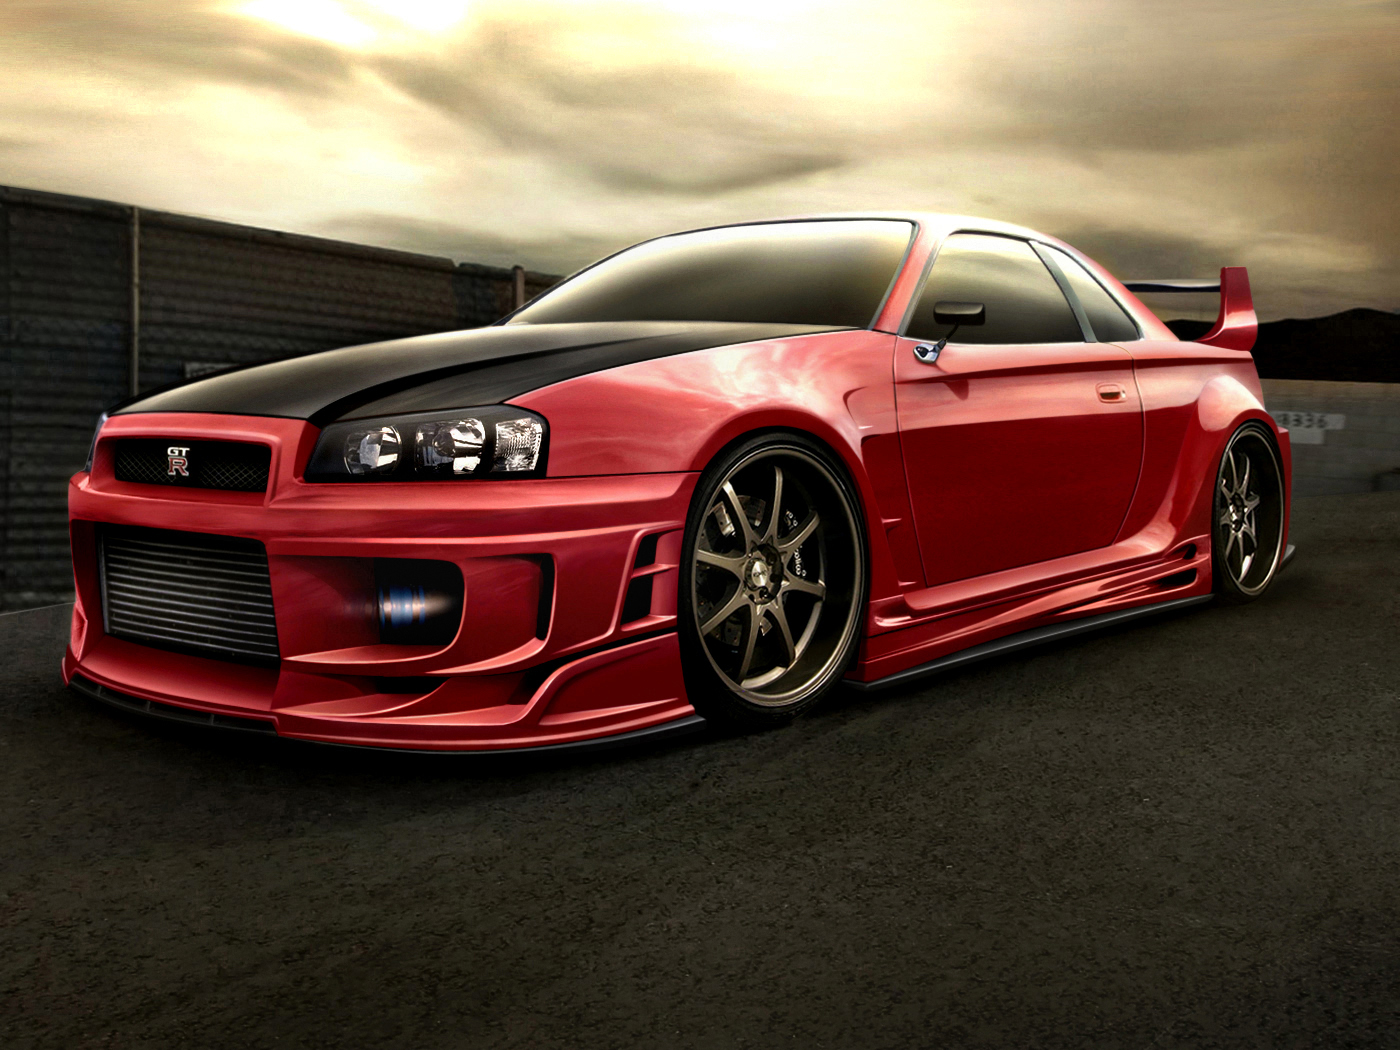 Awesome Nissan Gtr Wallpapers Hd